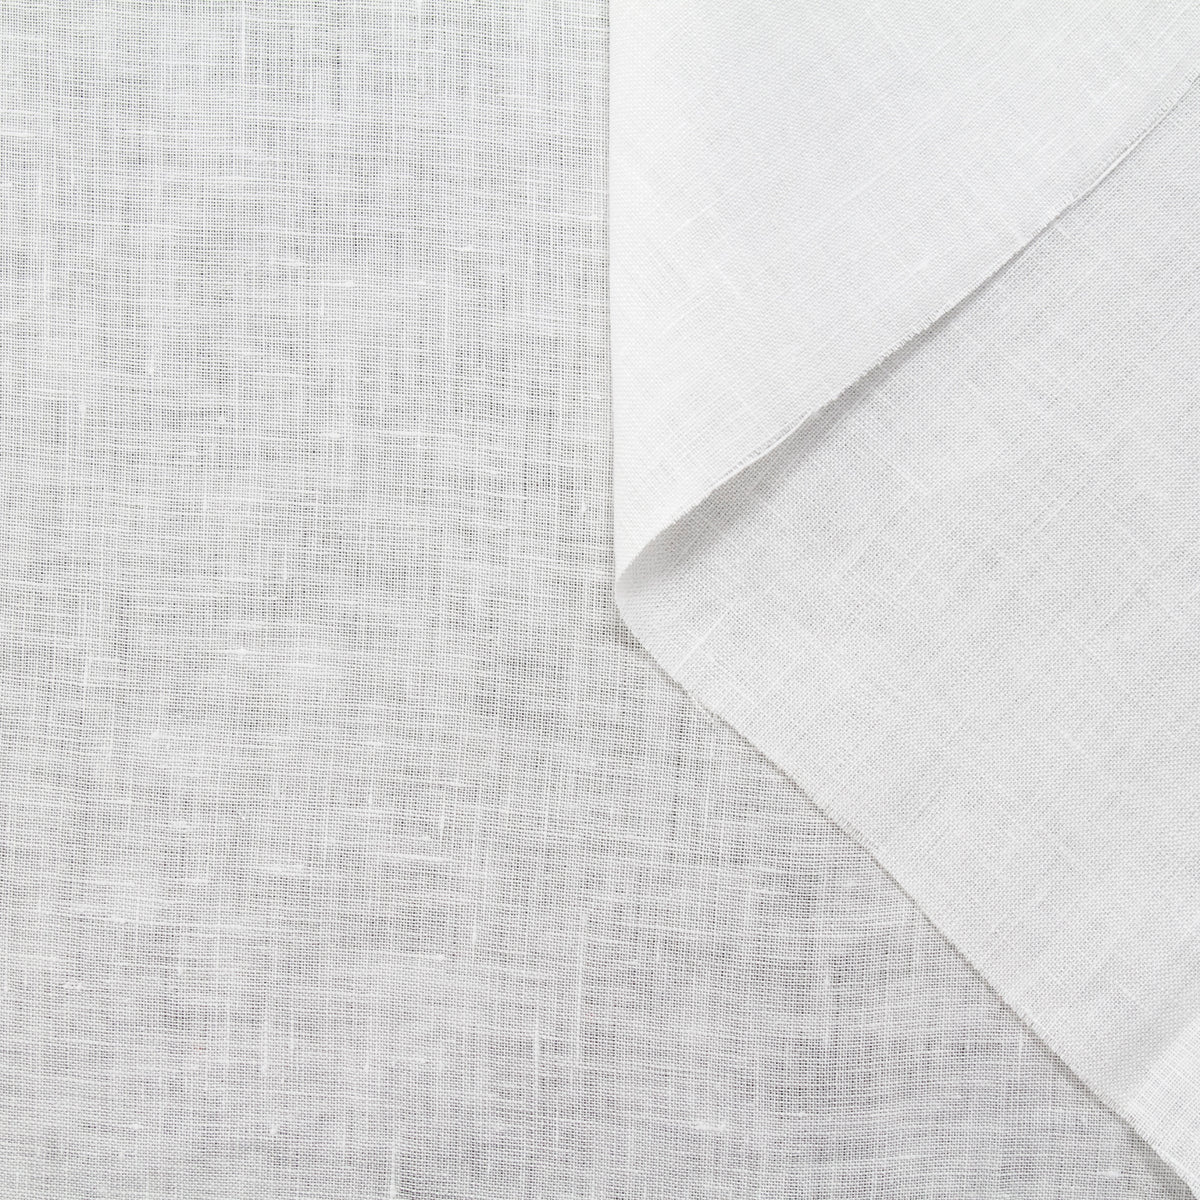 Cotton Ball White Solid Texture Linen Upholstery Fabric by The Yard